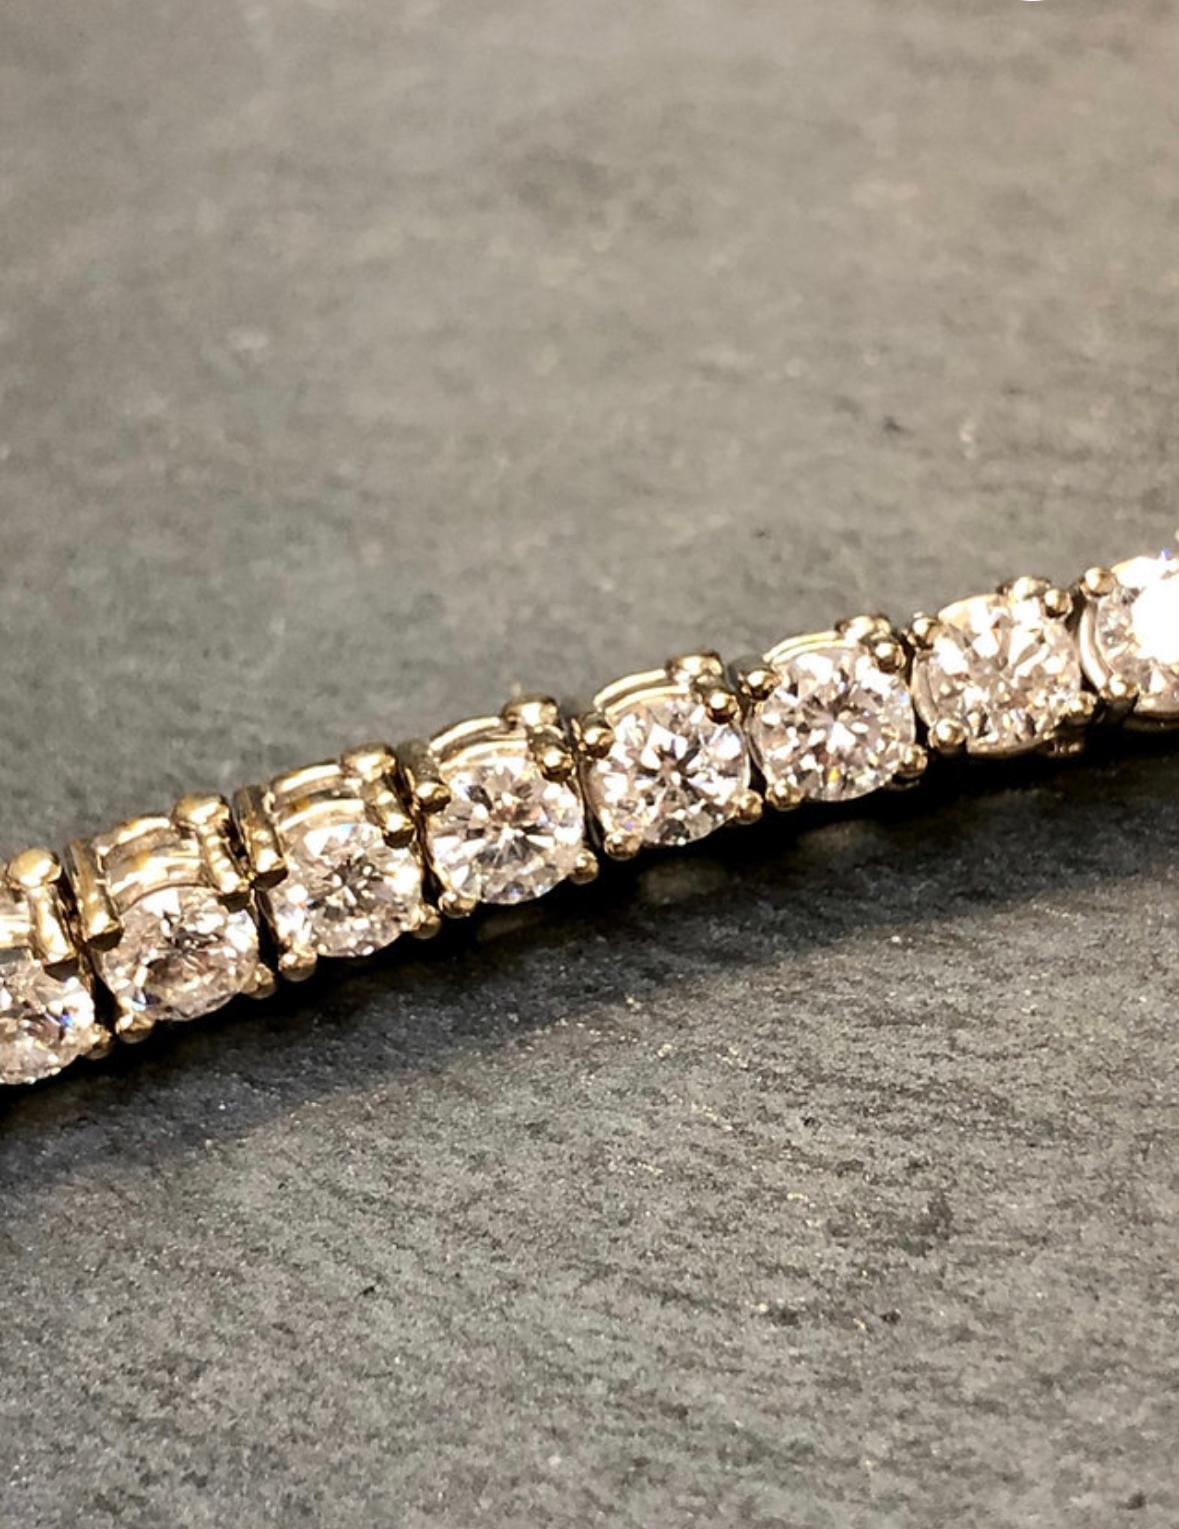 Classic tennis bracelet done in 14K white gold set with 36 round diamonds being G-H color and Si1-2 clarity with a total approximate weight of 9cttw.

Dimensions/Weight
6 3/4” long. Weighs 13.2dwt.

Condition
All stones are secure and clasp